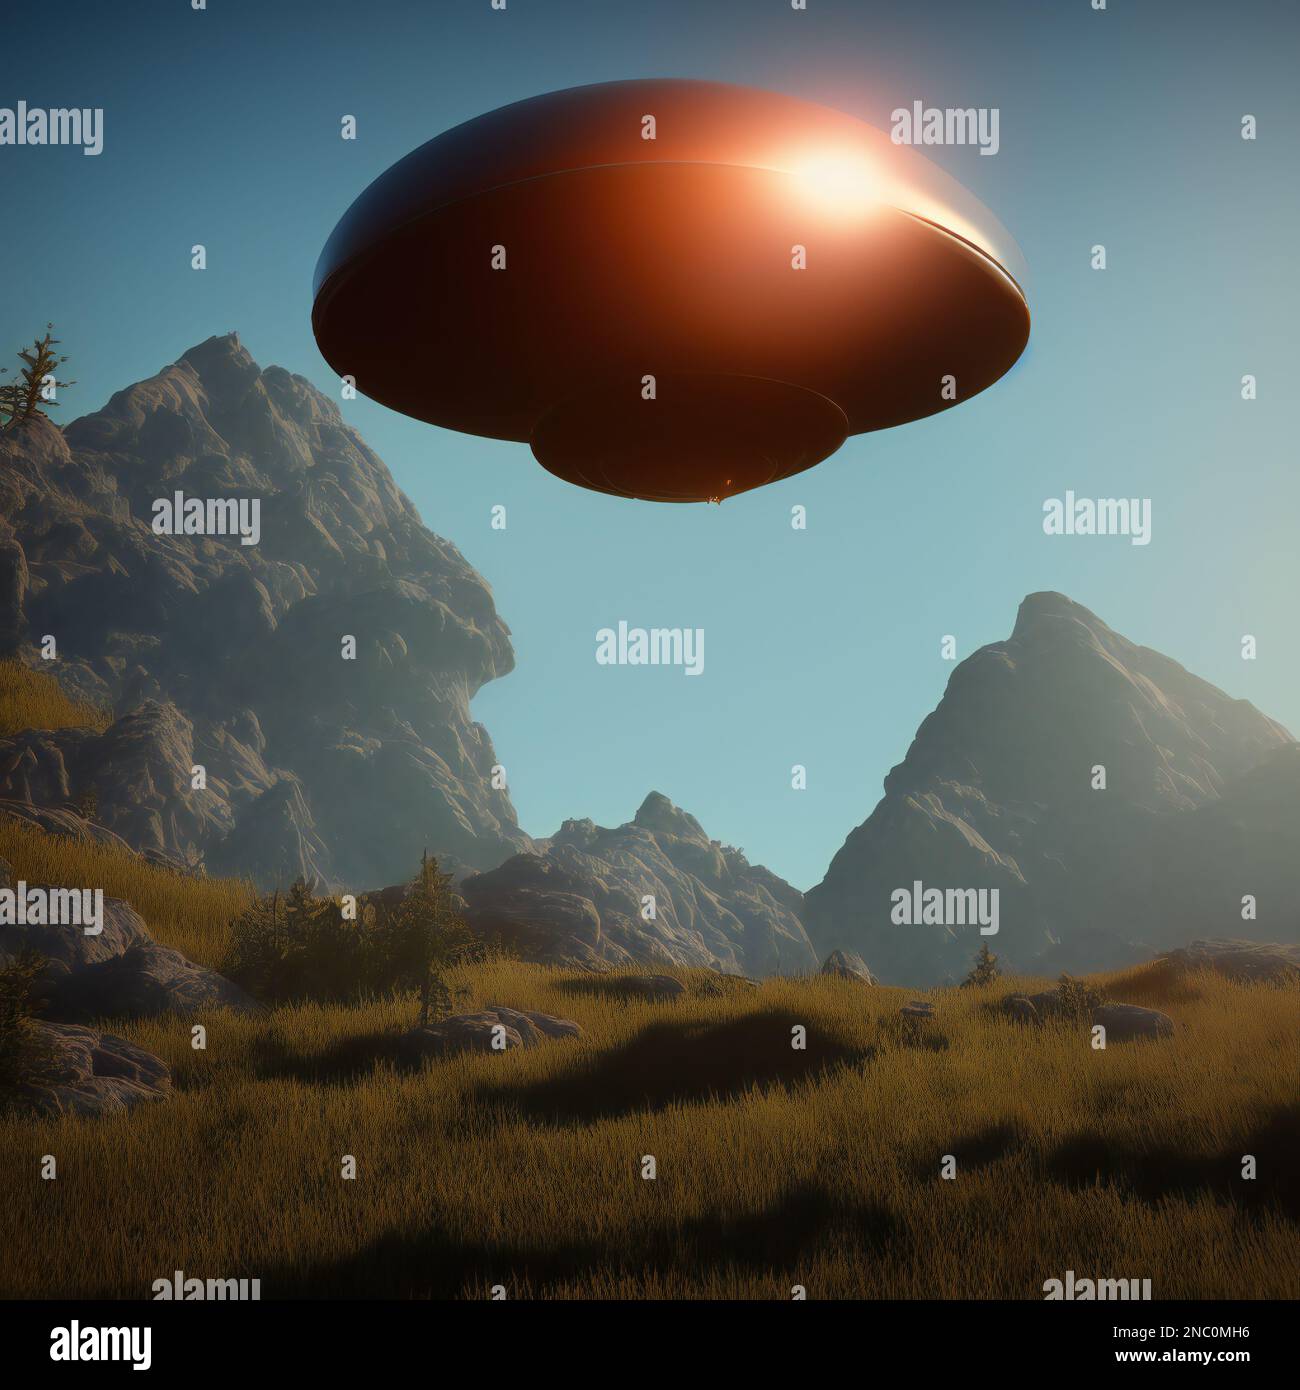 Flying Saucer Visiting An Earth-Like Planet, Illustration Stock Photo